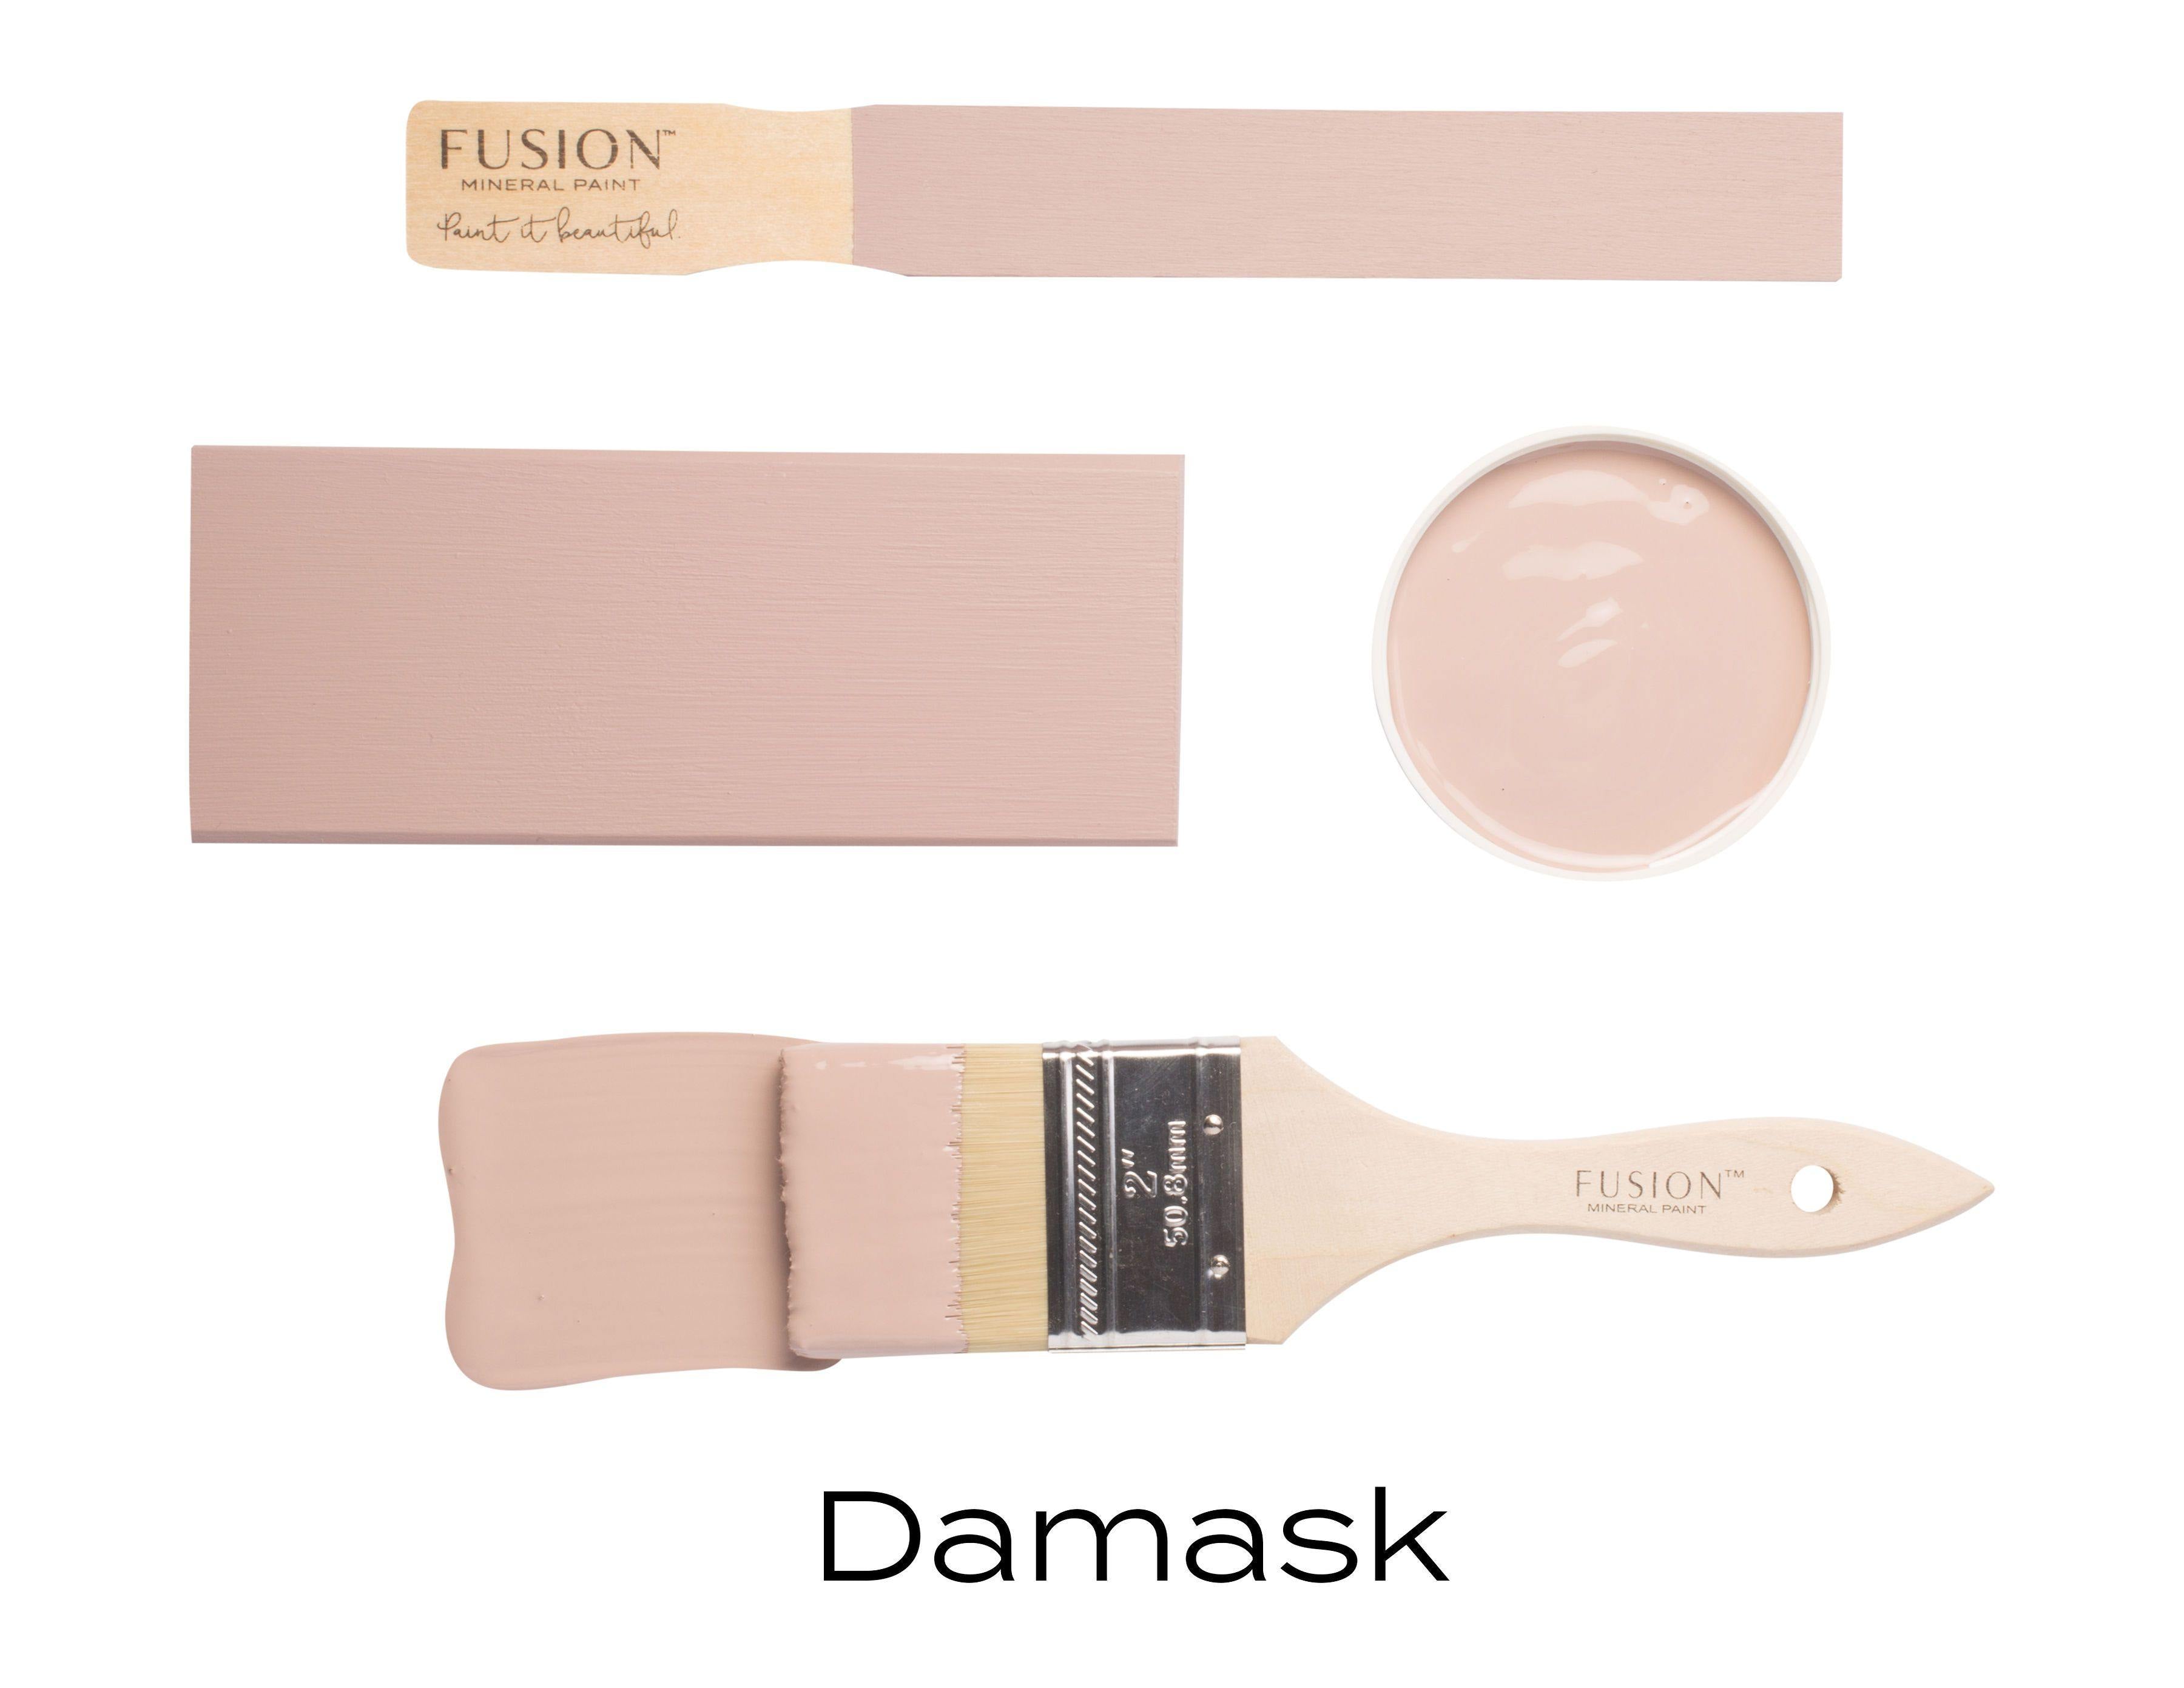 Fusion Mineral Paint Damask Brushstroke